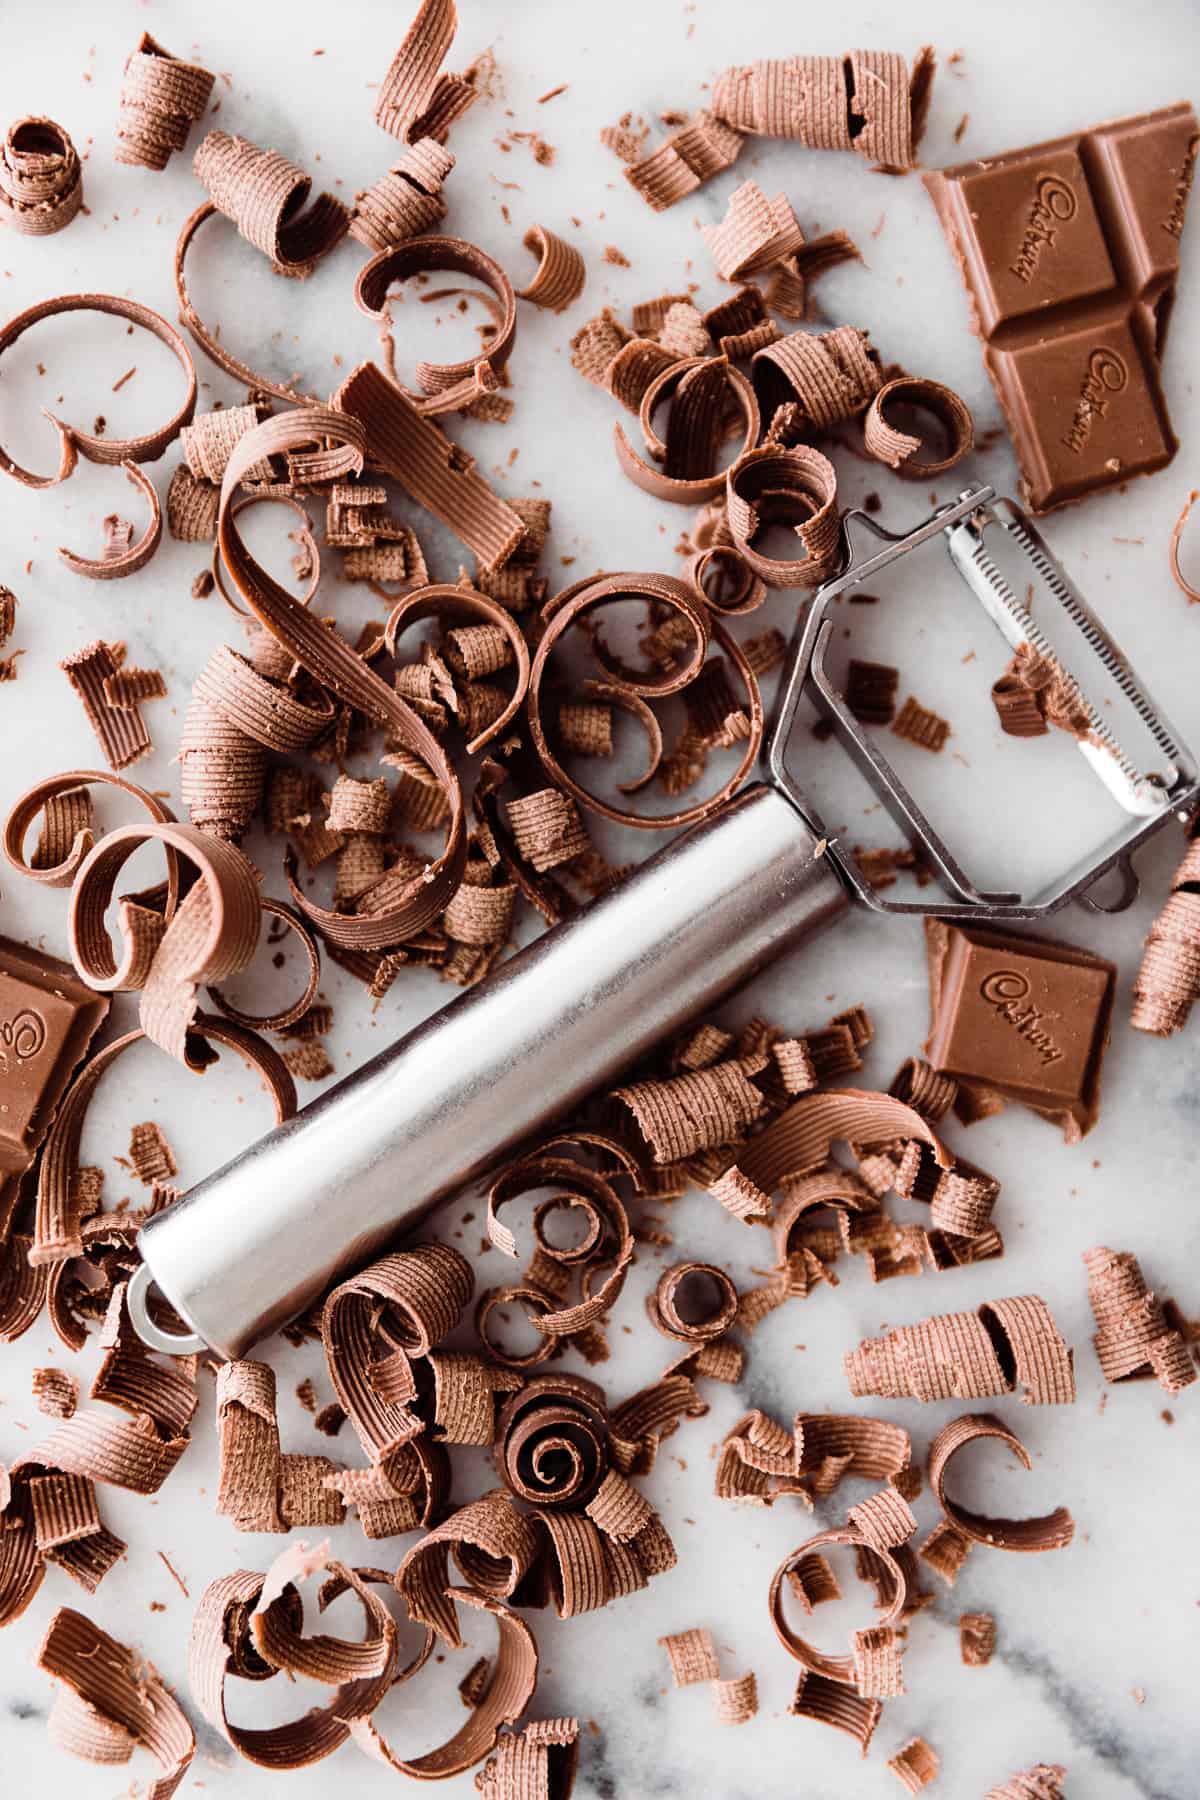 Vegetable peeler in the middle of a bunch of chocolate curls or ribbons. 